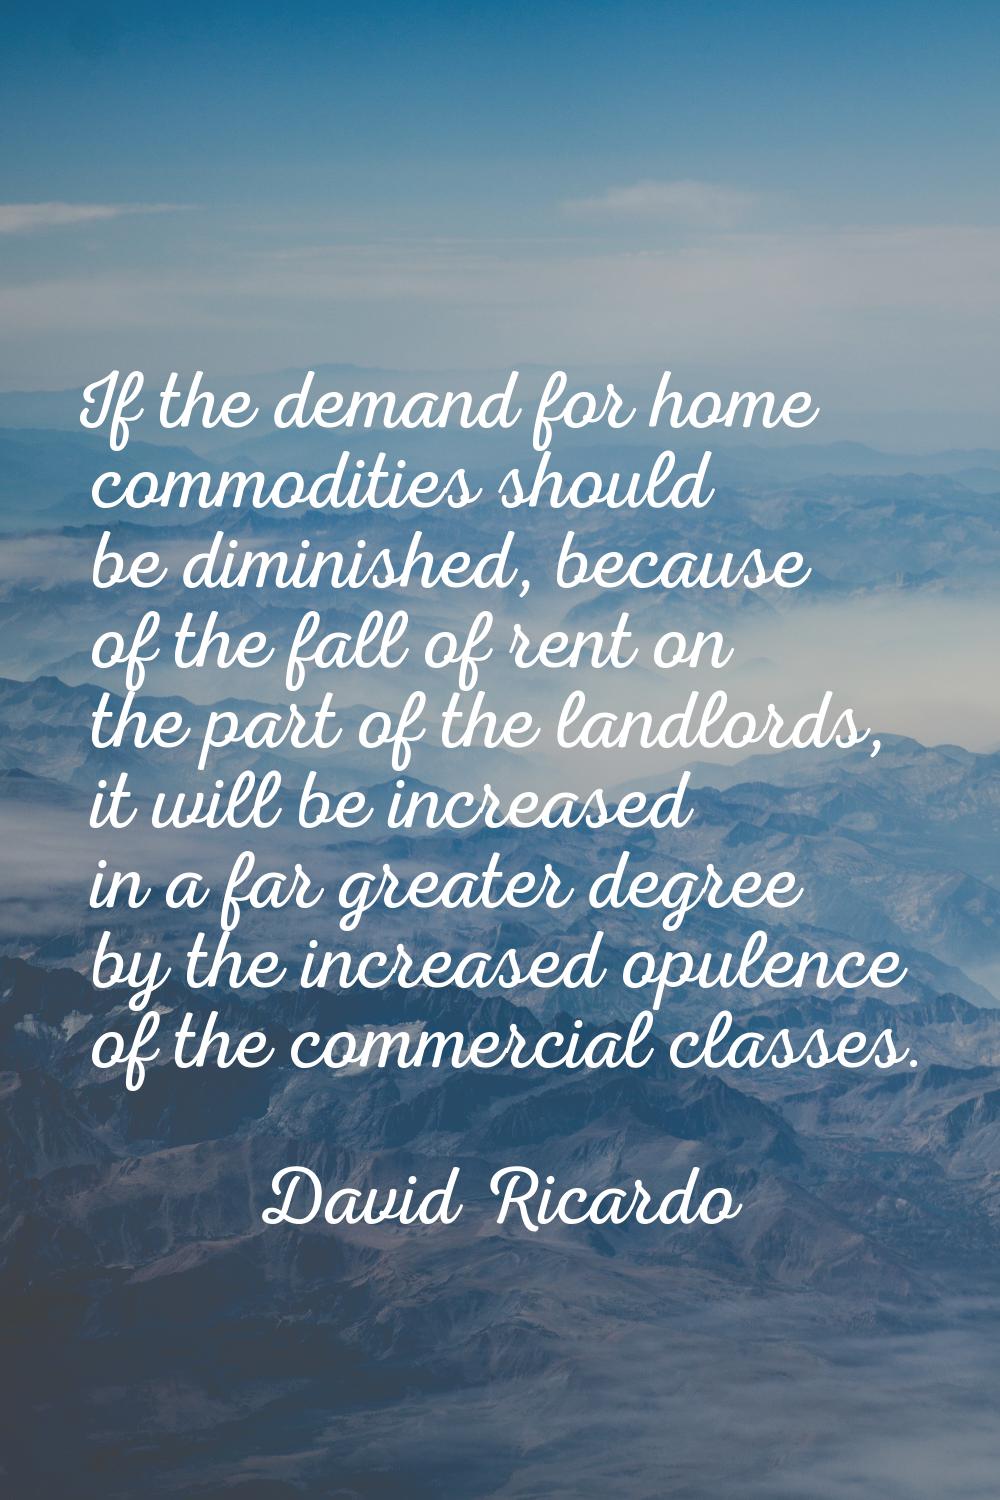 If the demand for home commodities should be diminished, because of the fall of rent on the part of